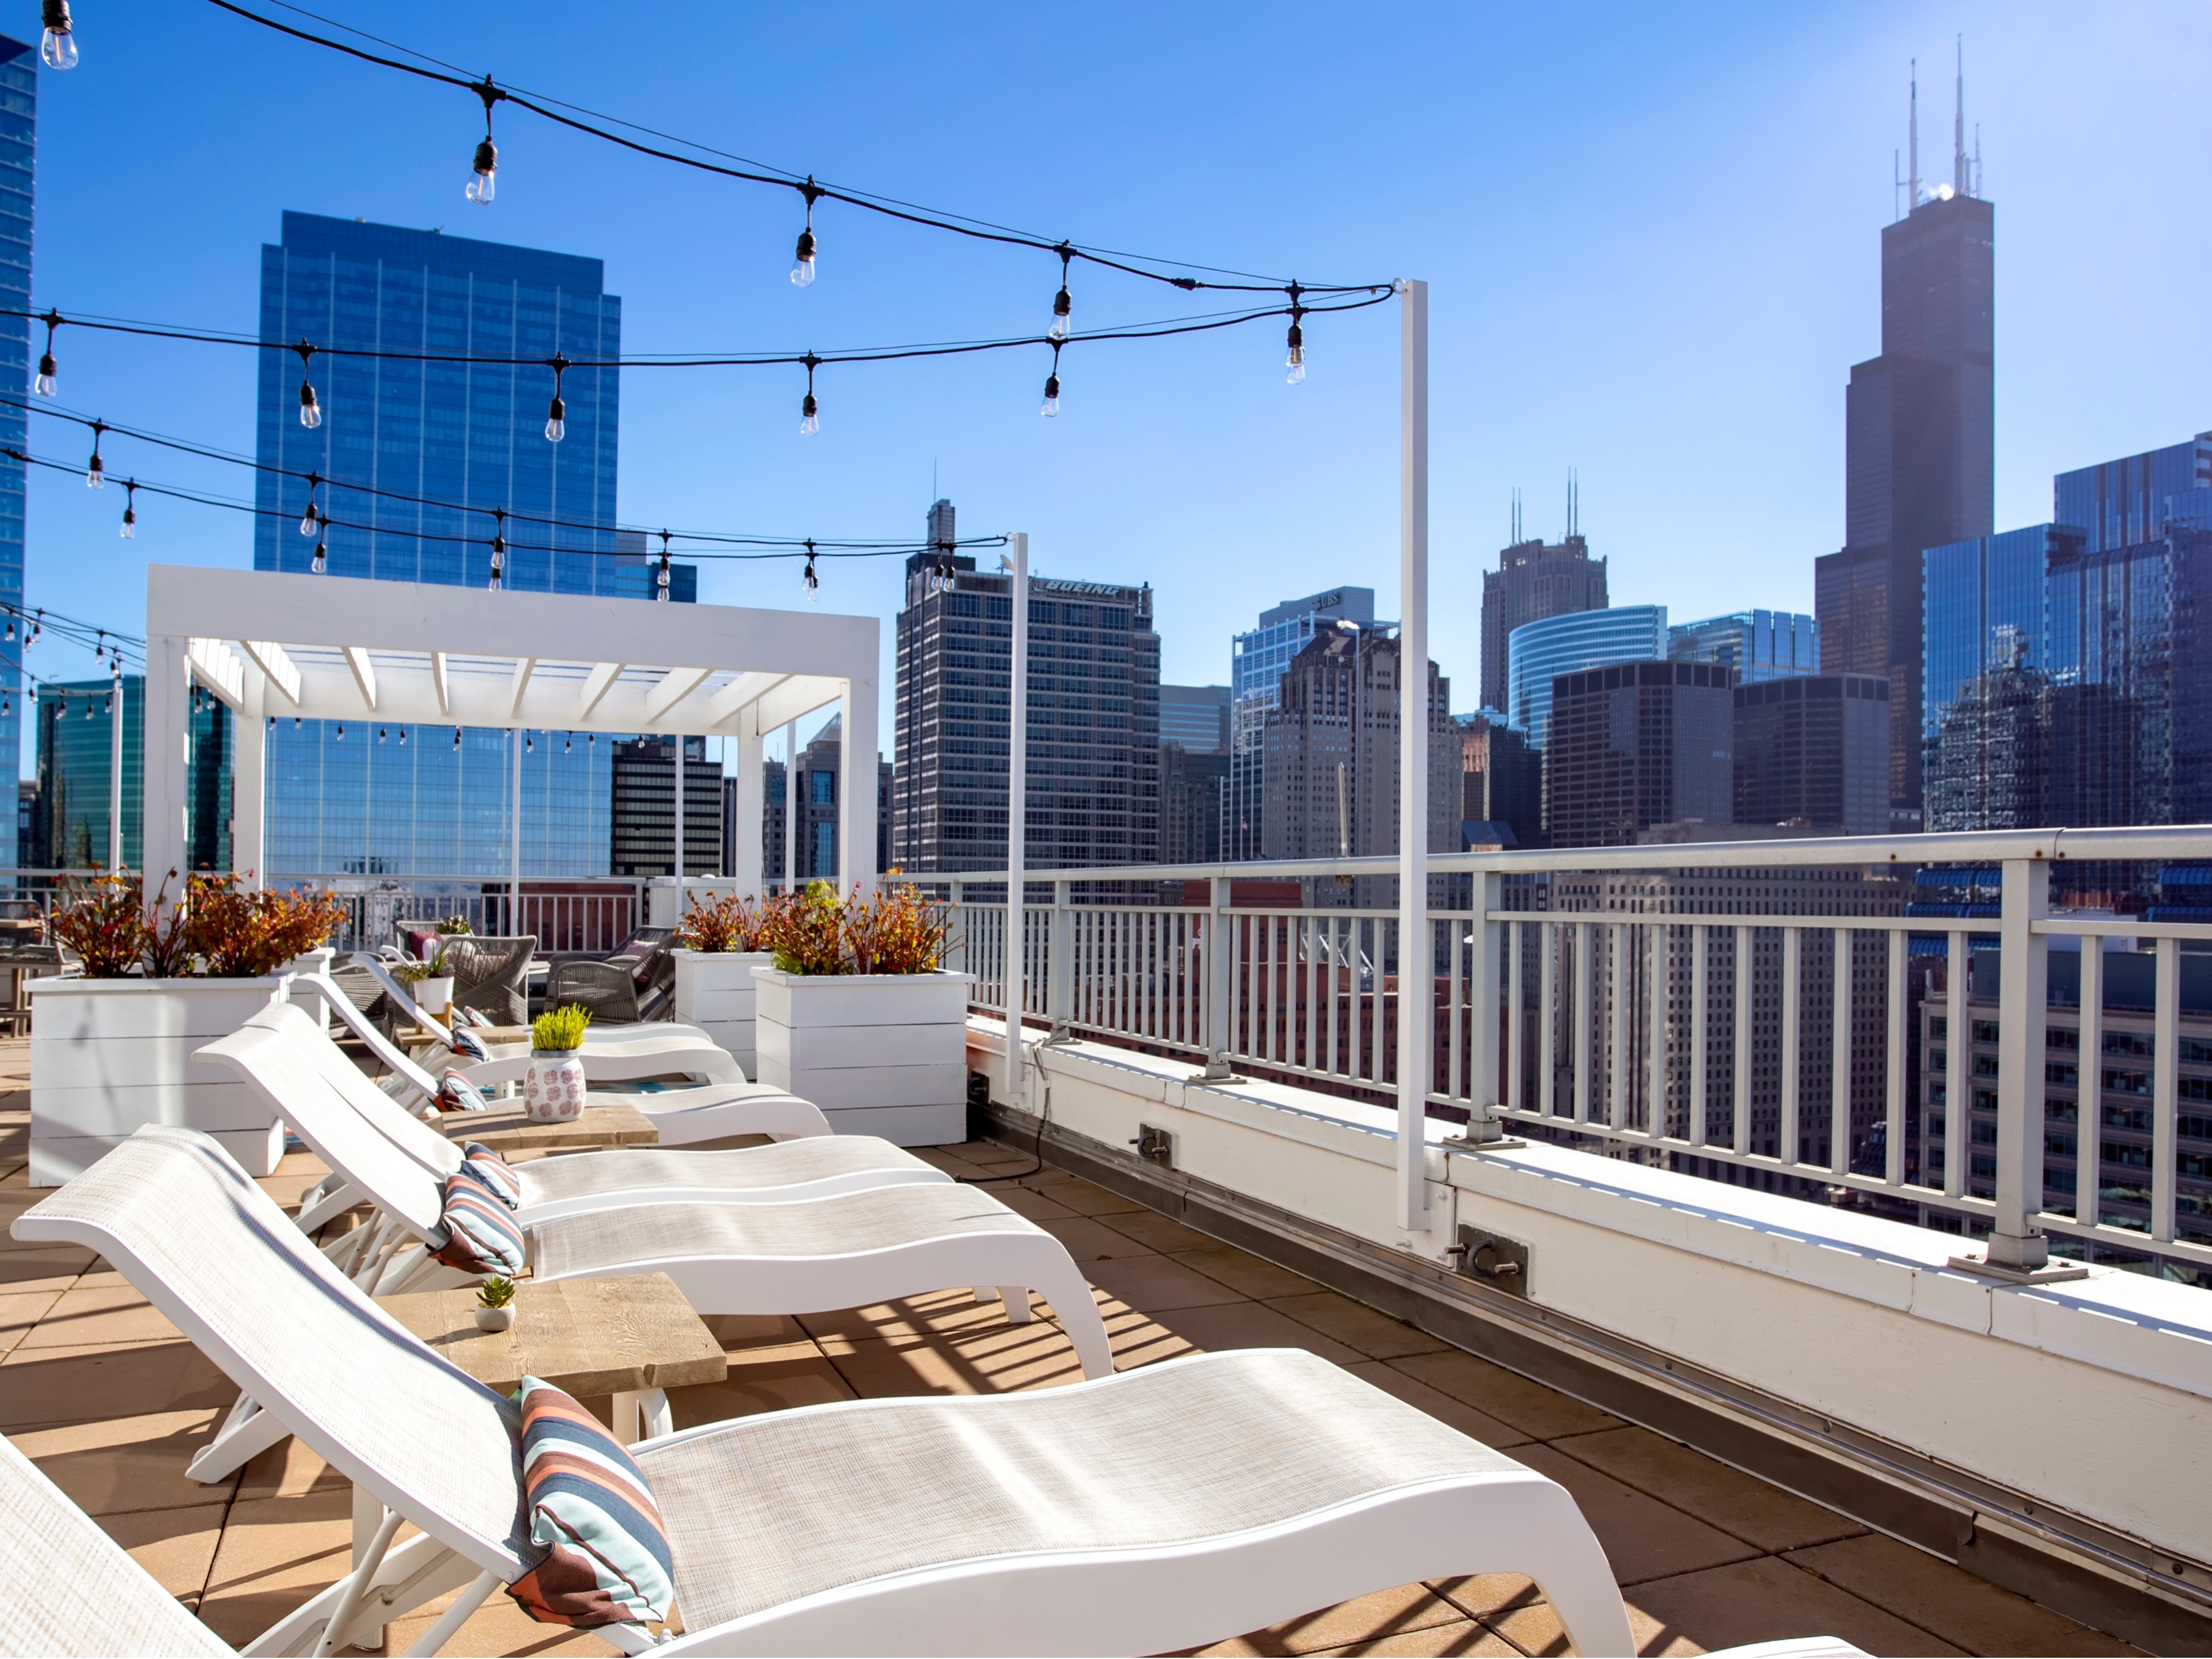 Professional photography shot of an apartment property's rooftop deck with loungechairs overlooking the city